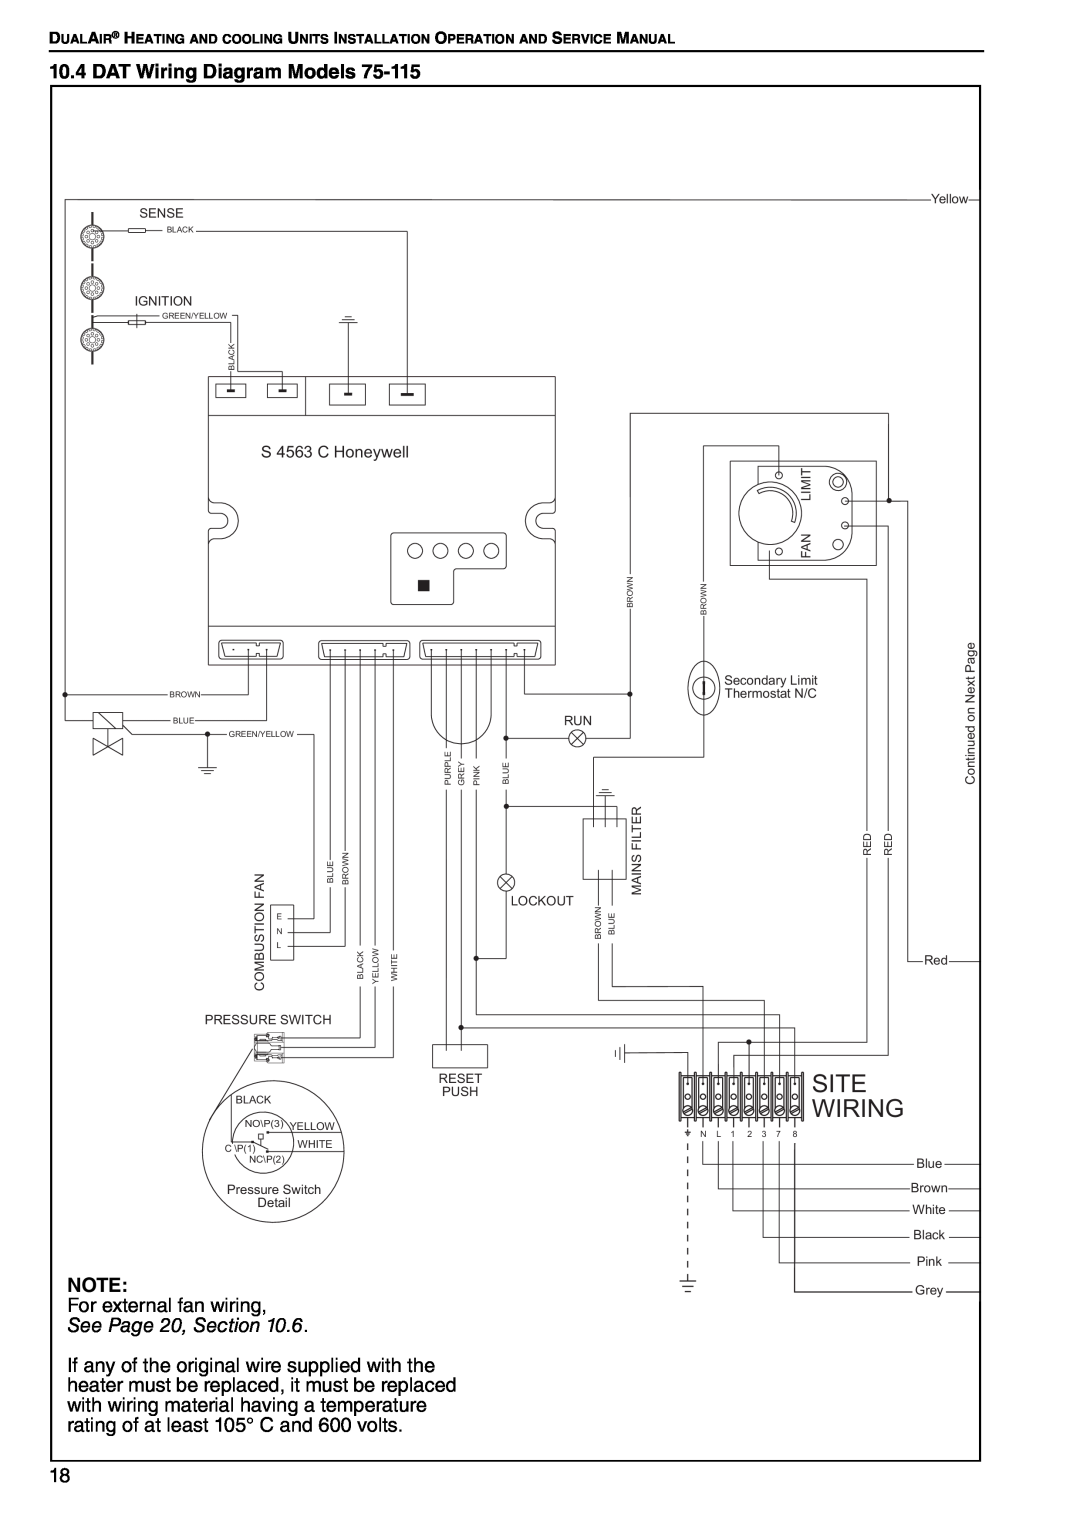 Roberts Gorden DAT75, DAT90, DAT100, DAT115 service manual DAT Wiring Diagram Models, See Page 20, Section, Site Wiring 